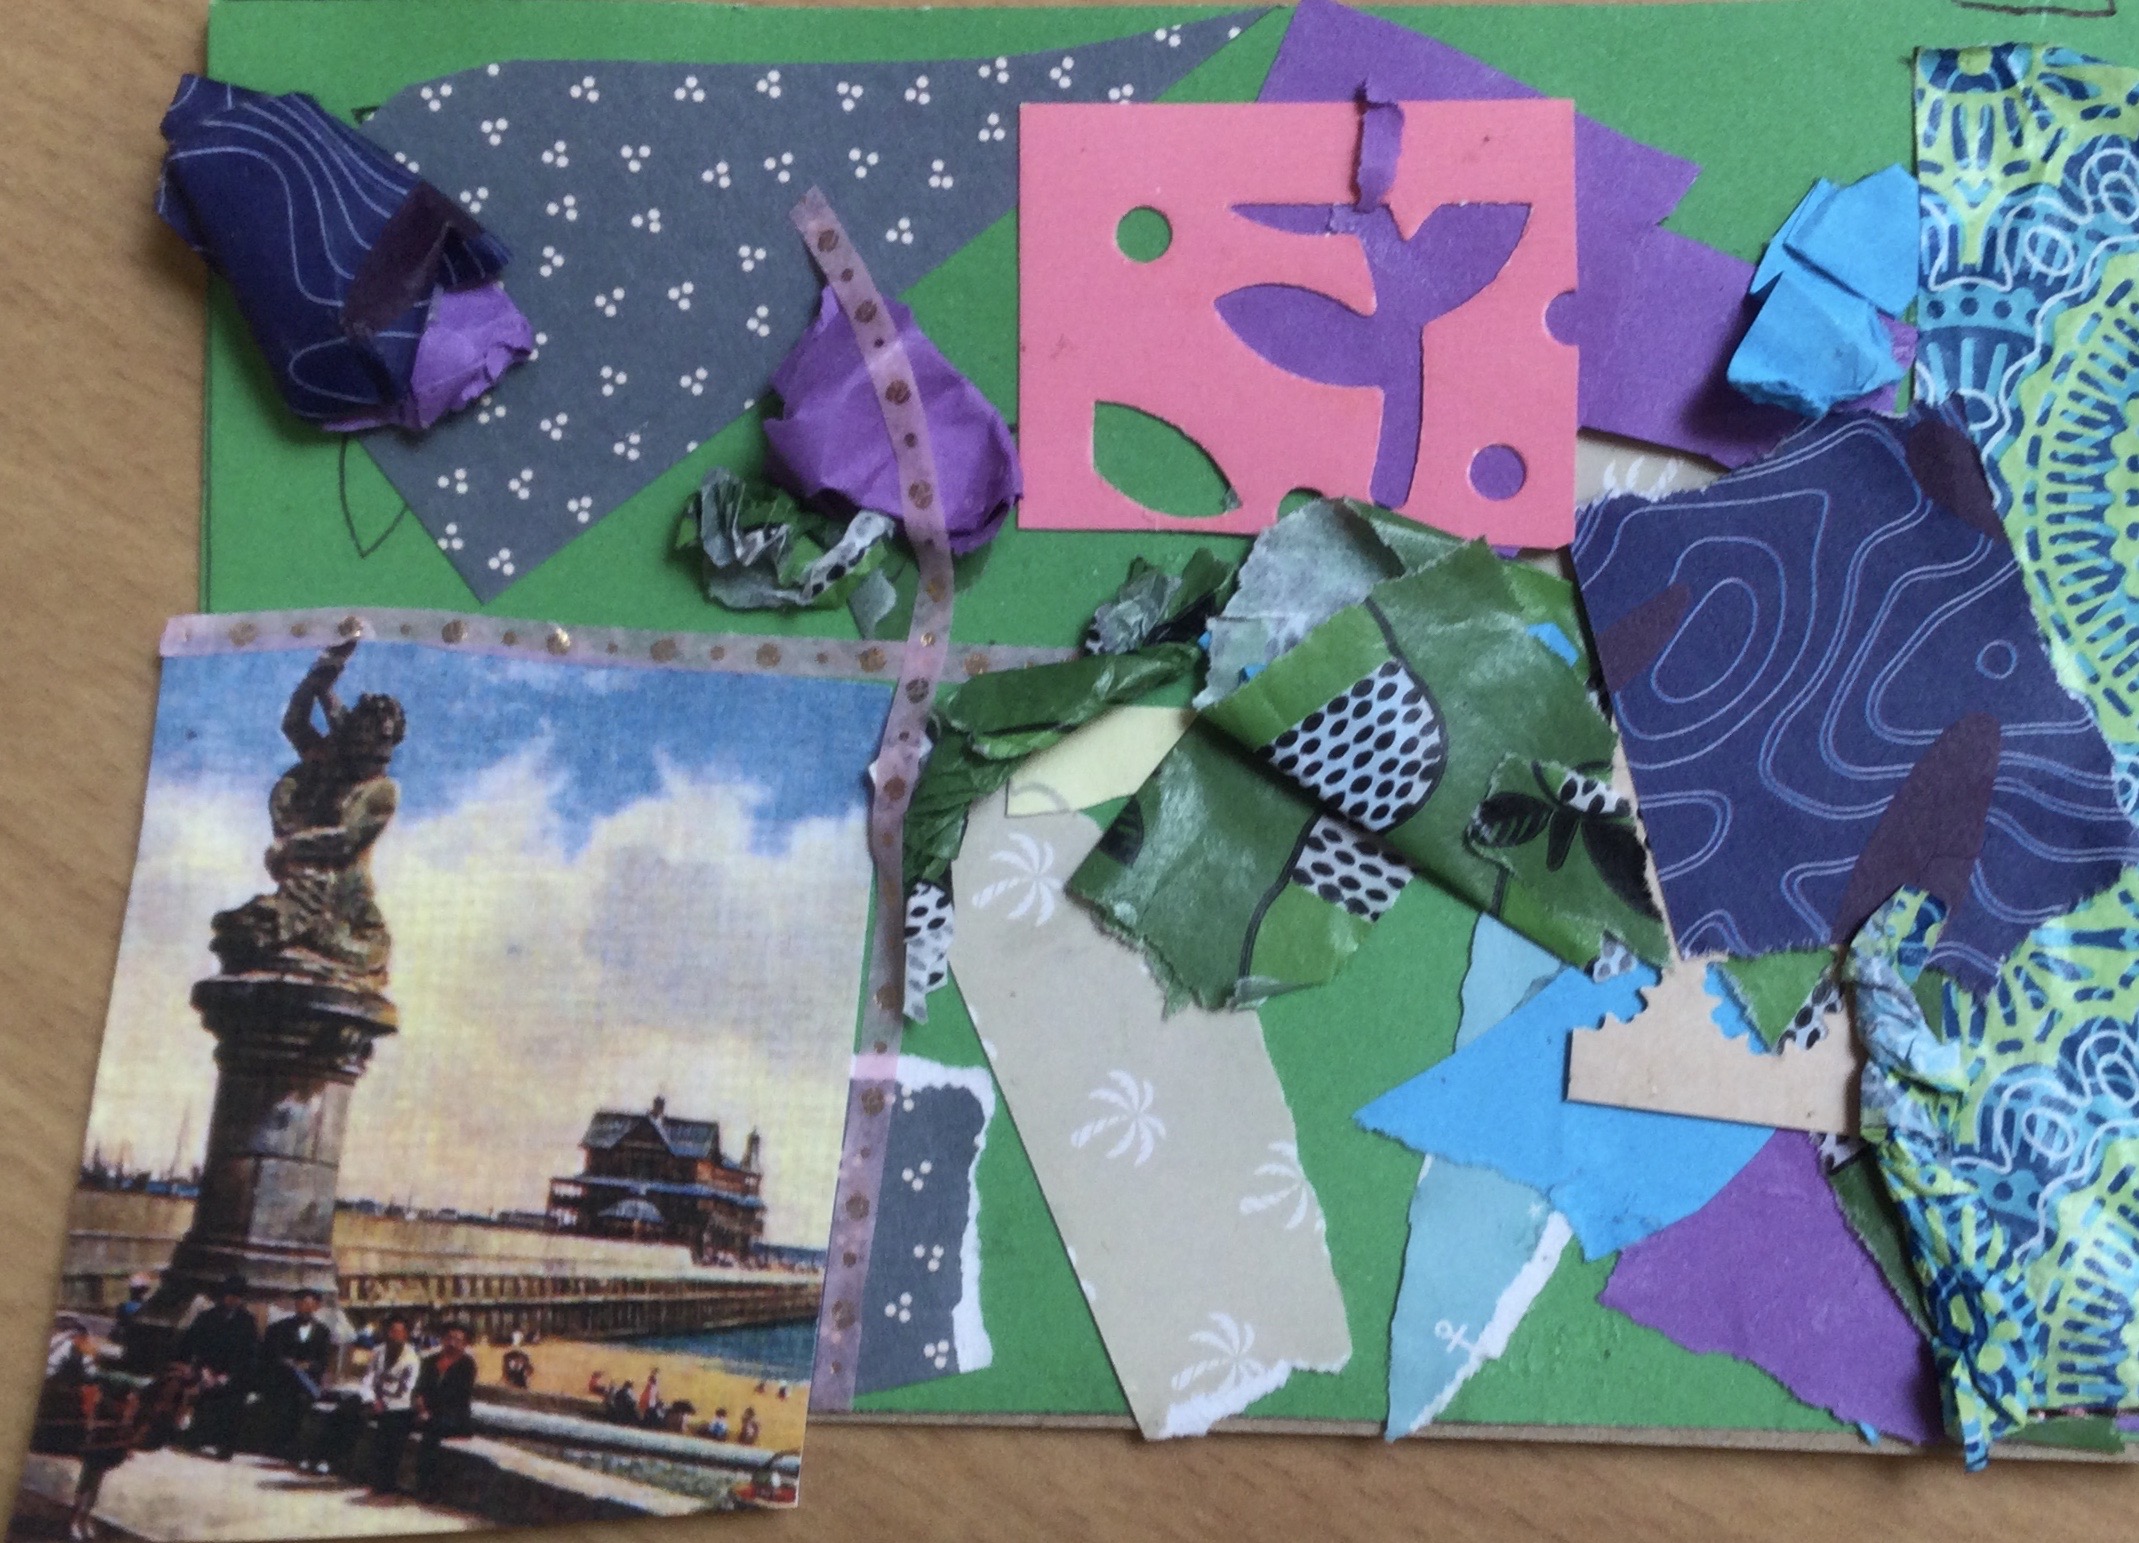 A collaged postcard made with a variety of blue and green patterned papers, thin tape and a piece of pink latticed card. A snippet from a vintage postcard showing the pier and statue of Titan is bottom right.